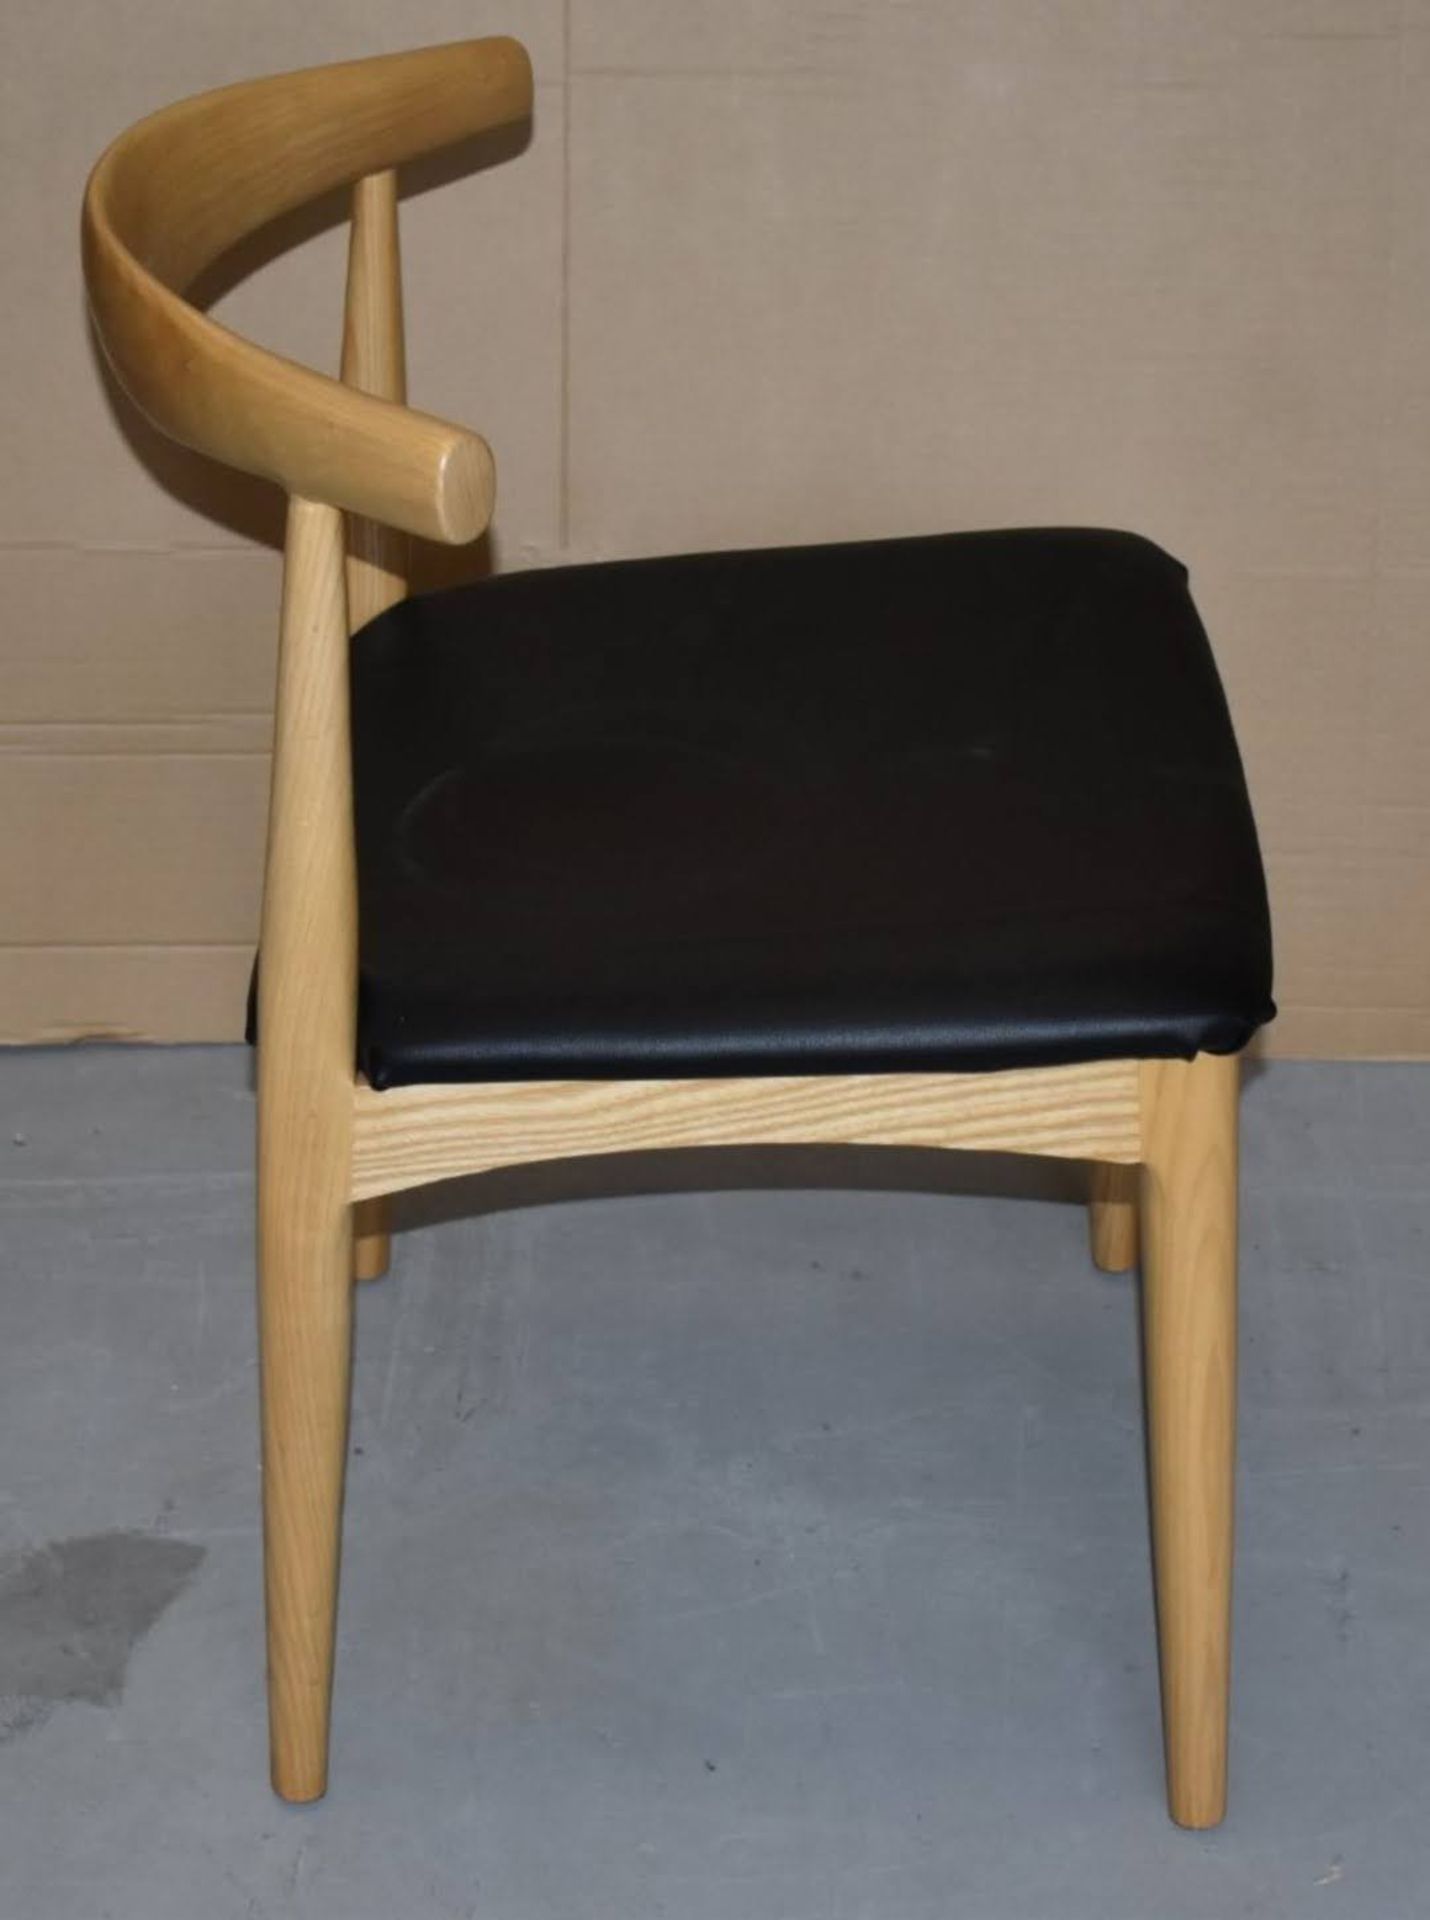 1 x Hans Wegner Inspired Elbow Chair - Solid Wood Chair With Light Stain Finish and Black Seat Pad - - Image 7 of 9